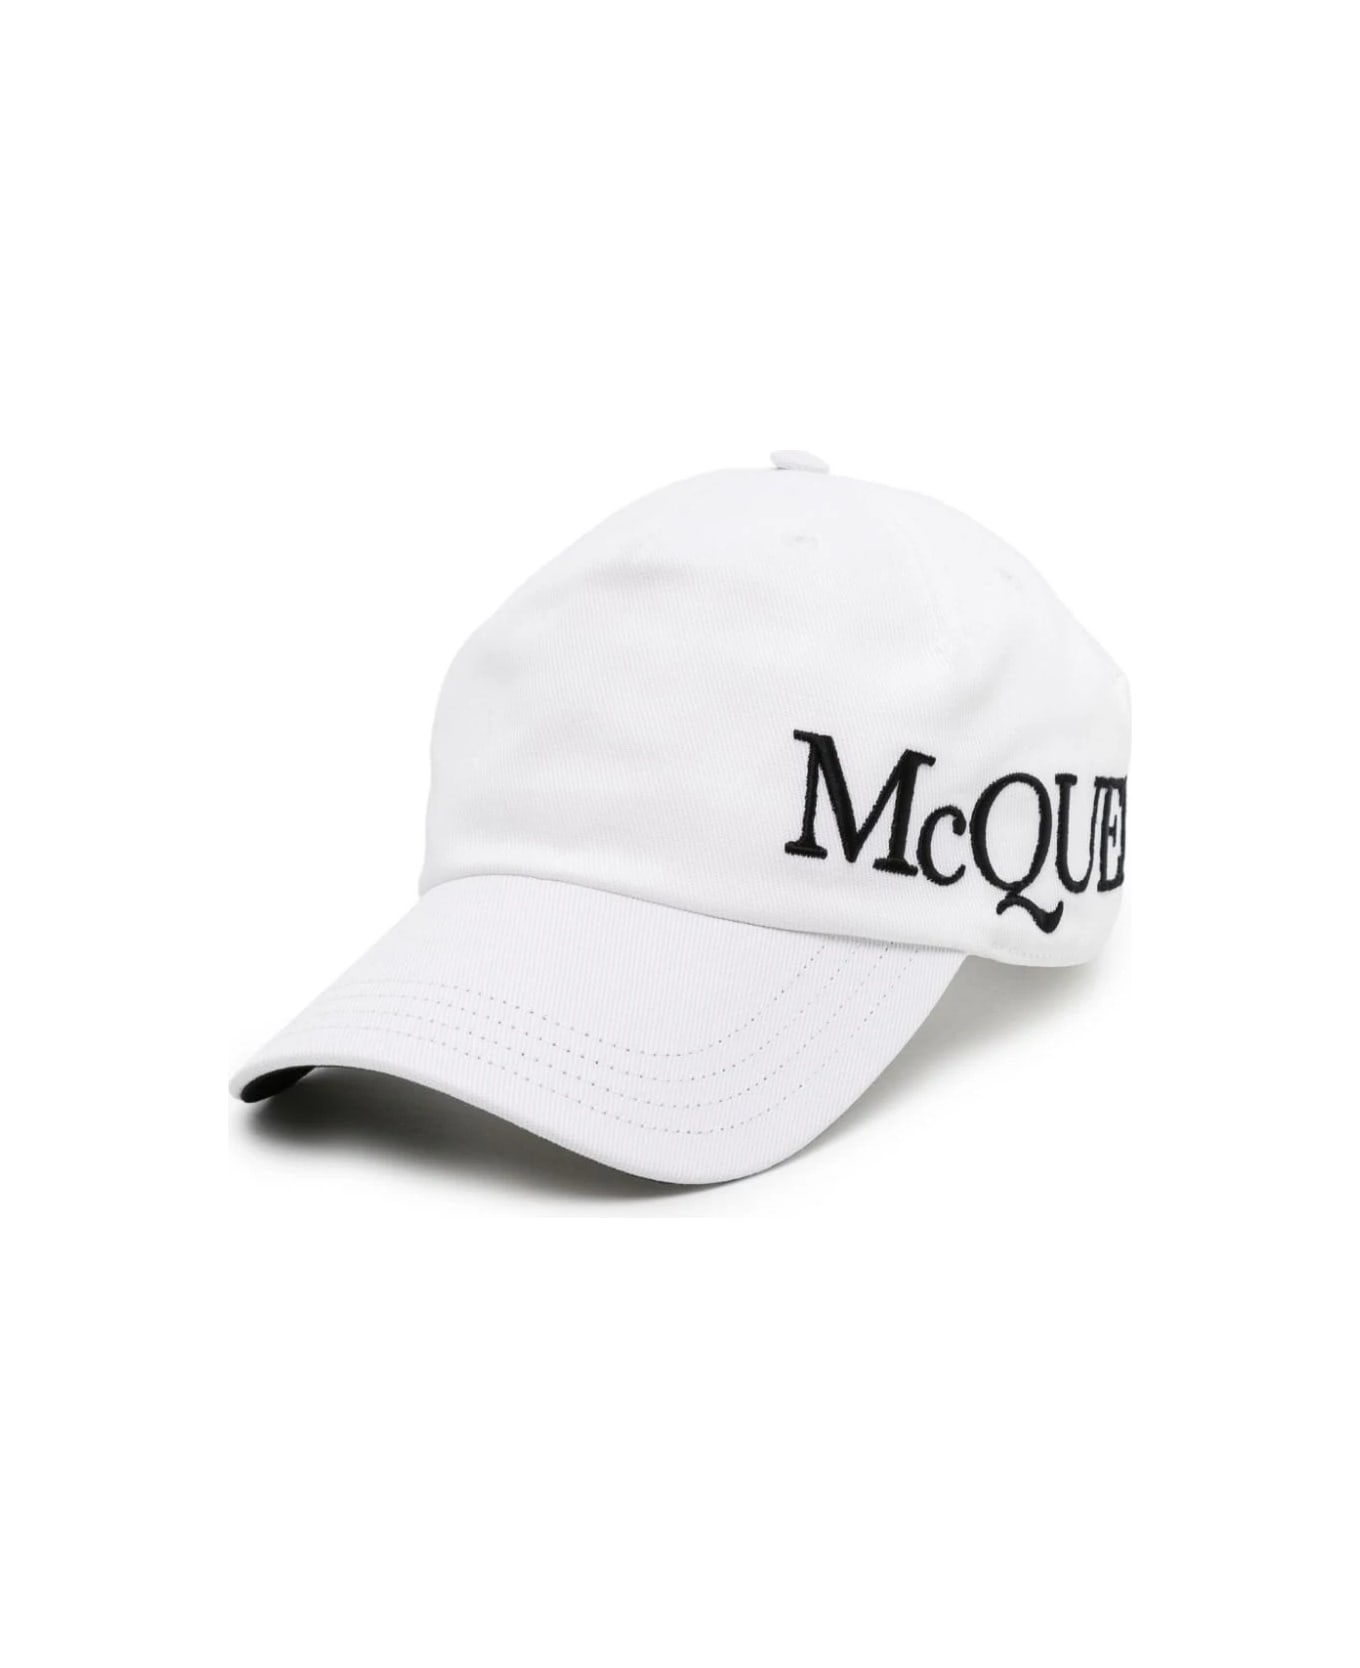 White Baseball Hat With Mcqueen Embroidery - 1